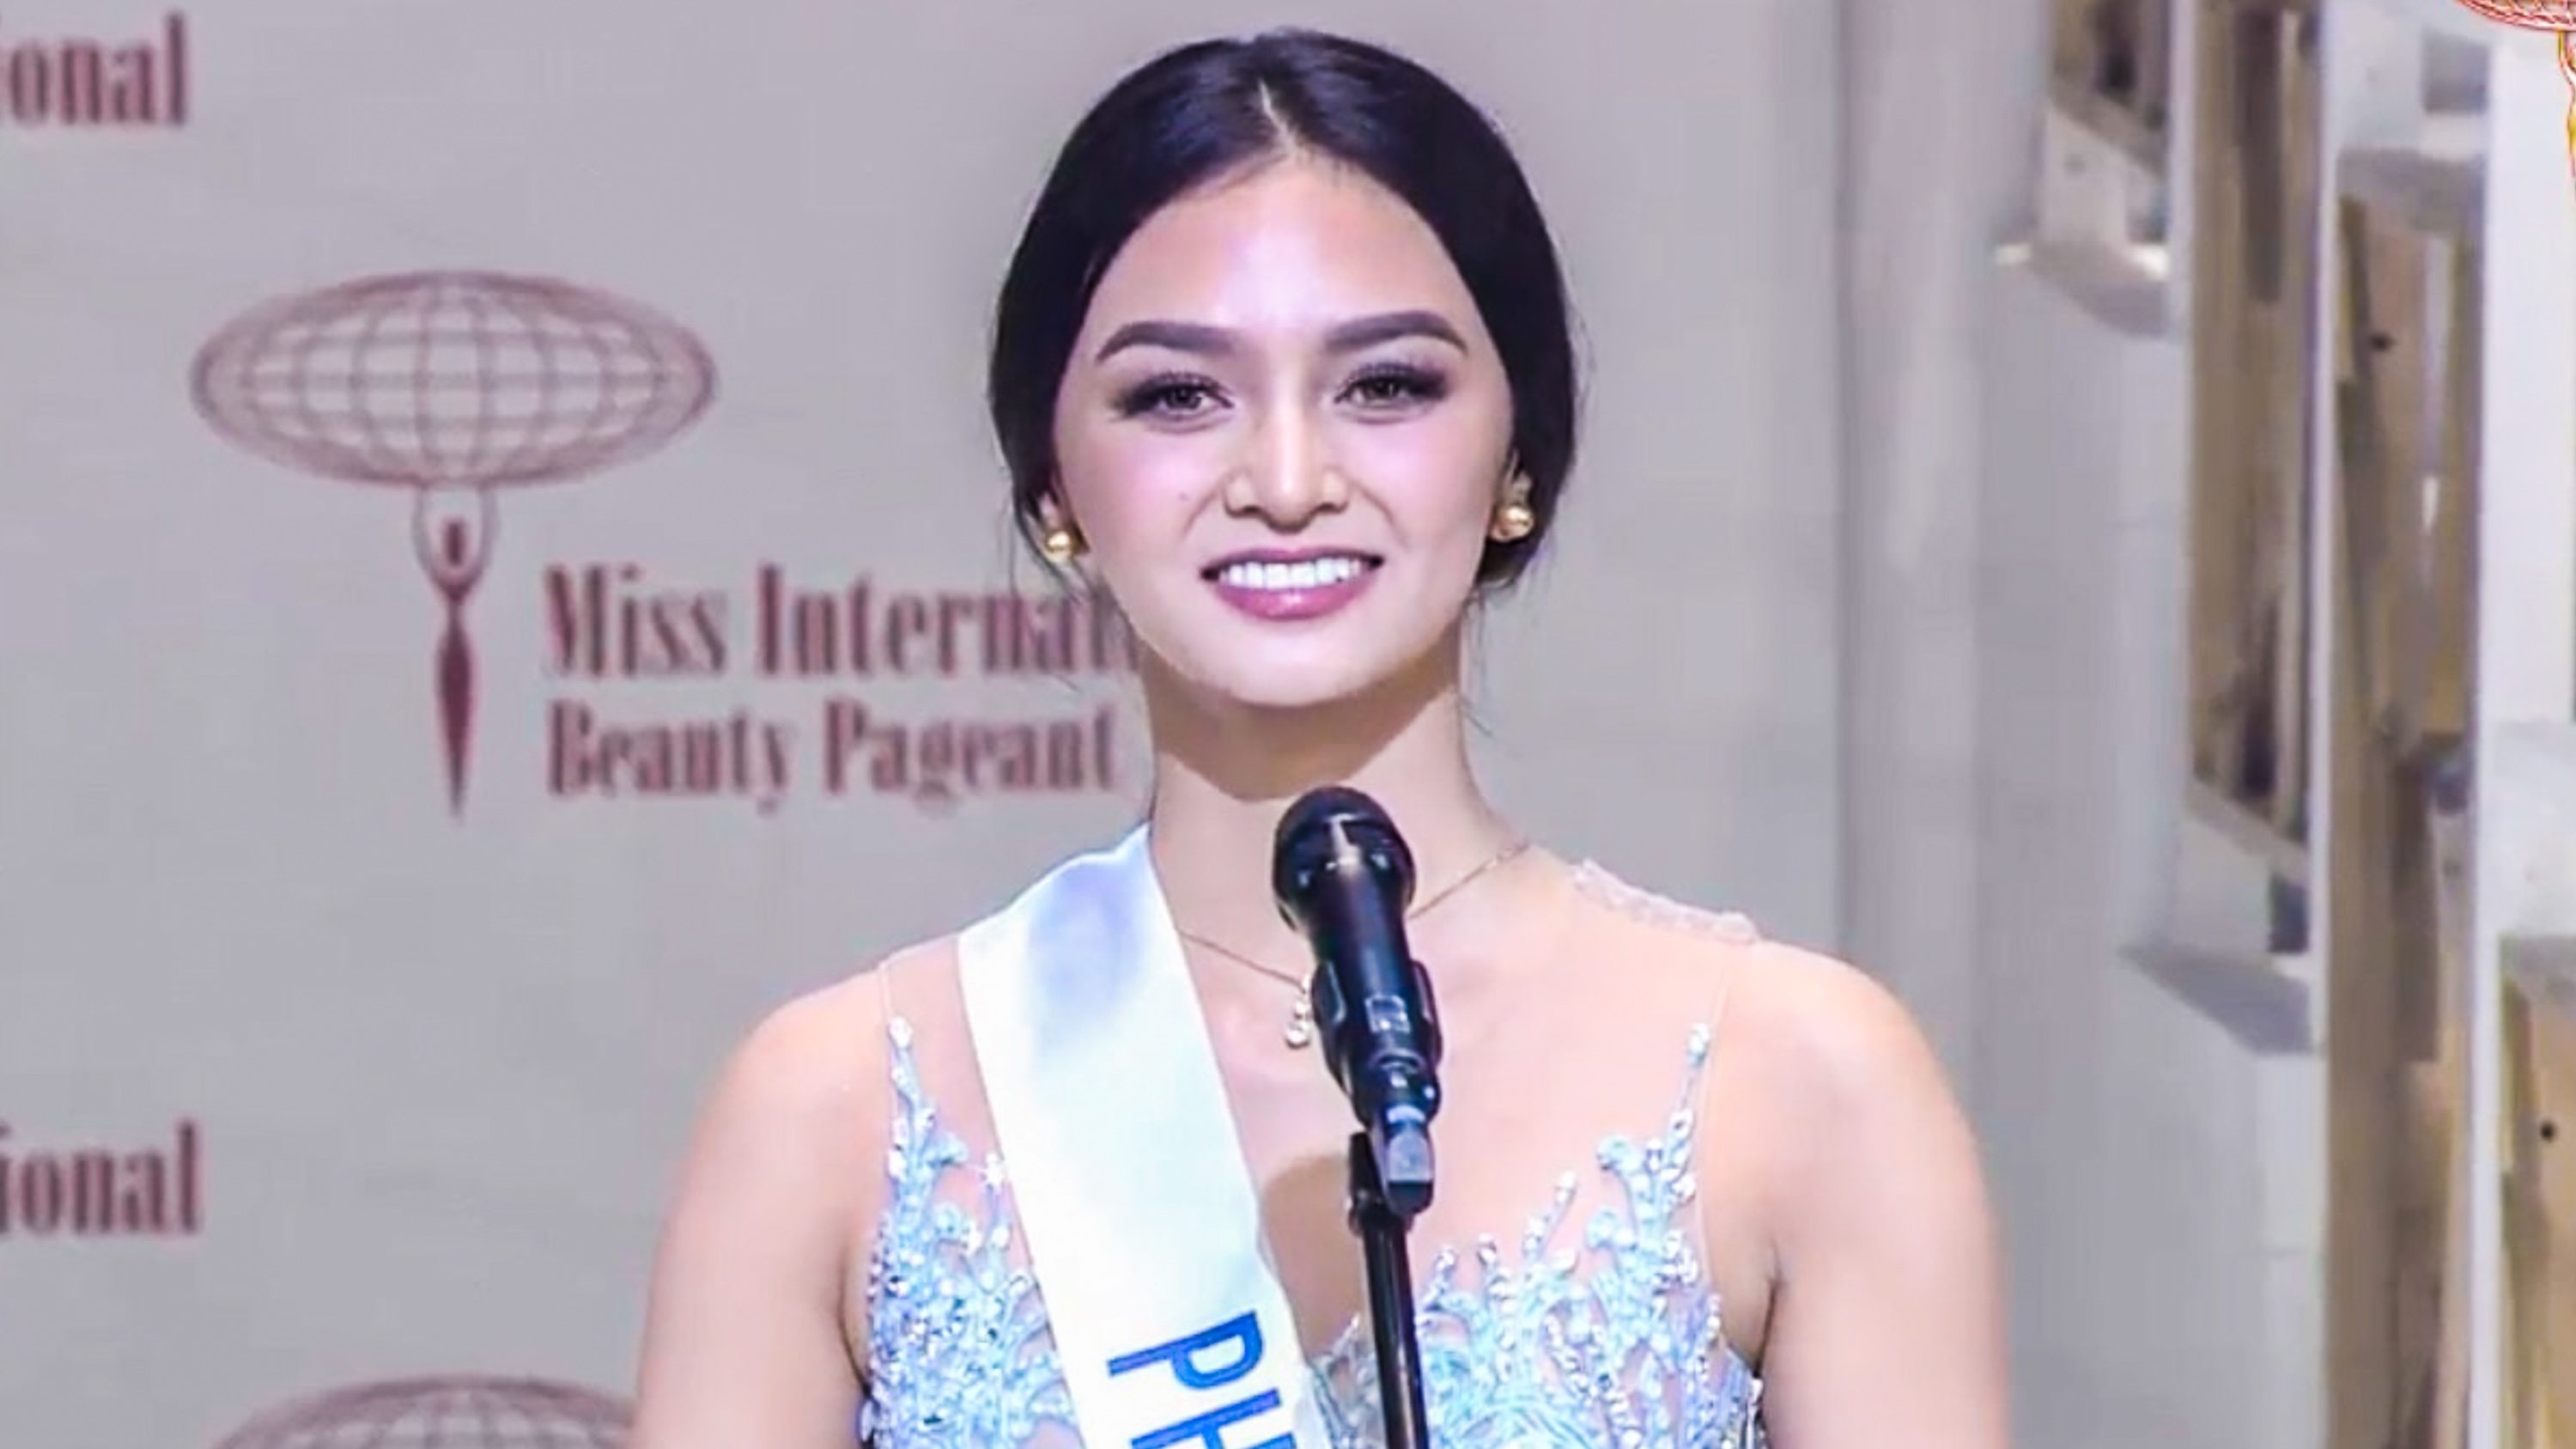 KYLIE VERZOSA. Miss International 2016 gives her speech at the pageant. Screengrab from YouTube/MISS INTERNATIONAL BEAUTY PAGEANT 